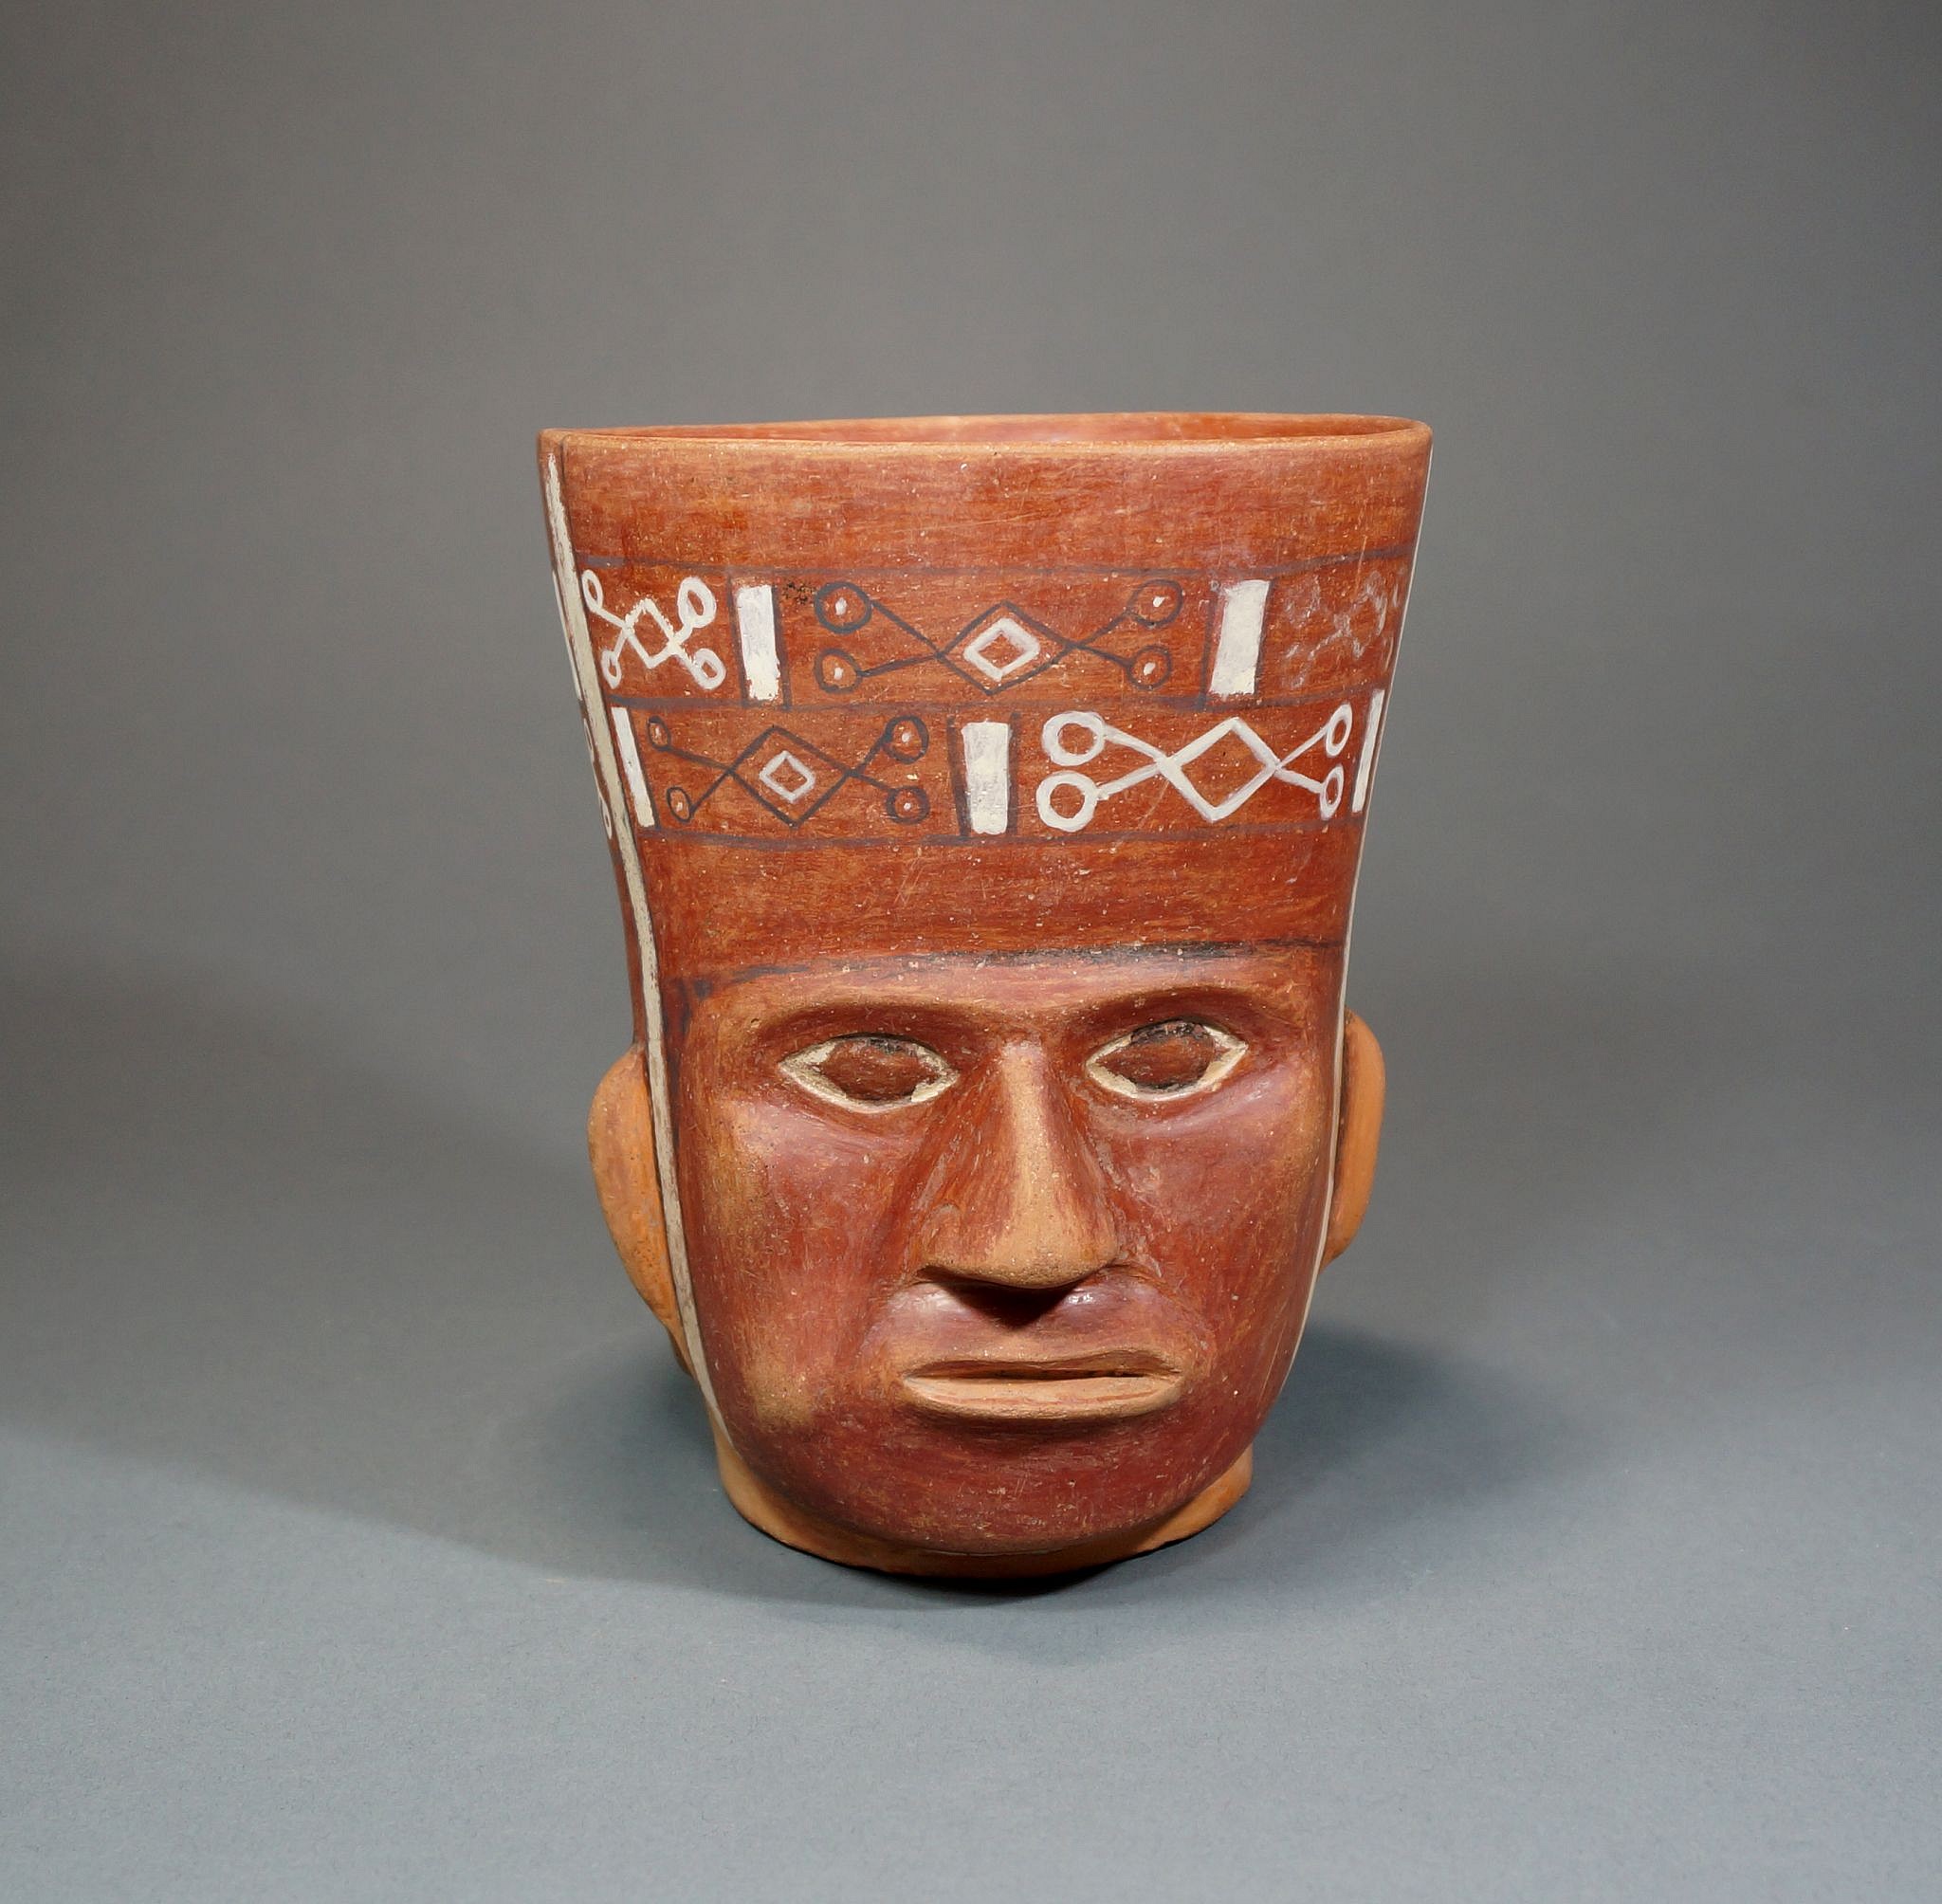 Bolivia, Tiawanaku Portrait Vessel Wearing a Woven Headpiece
This portrait vessel has a modeled coca leaf on the left cheek.  A similar portrait vessel is illustrated in TIAWANKU, ANCESTORS OF THE INCAS, edited by Margaret Young-Sanchez (fig. 5.24).  The portrait vessels from the Tiawanku culture must have been heavily influenced by the Moche People of the coast.  Ex Collection Arthur Sackler prior to 1970.
Media: Ceramic
Dimensions: Height: 5 7/8", Diameter 4 3/4"
n2006